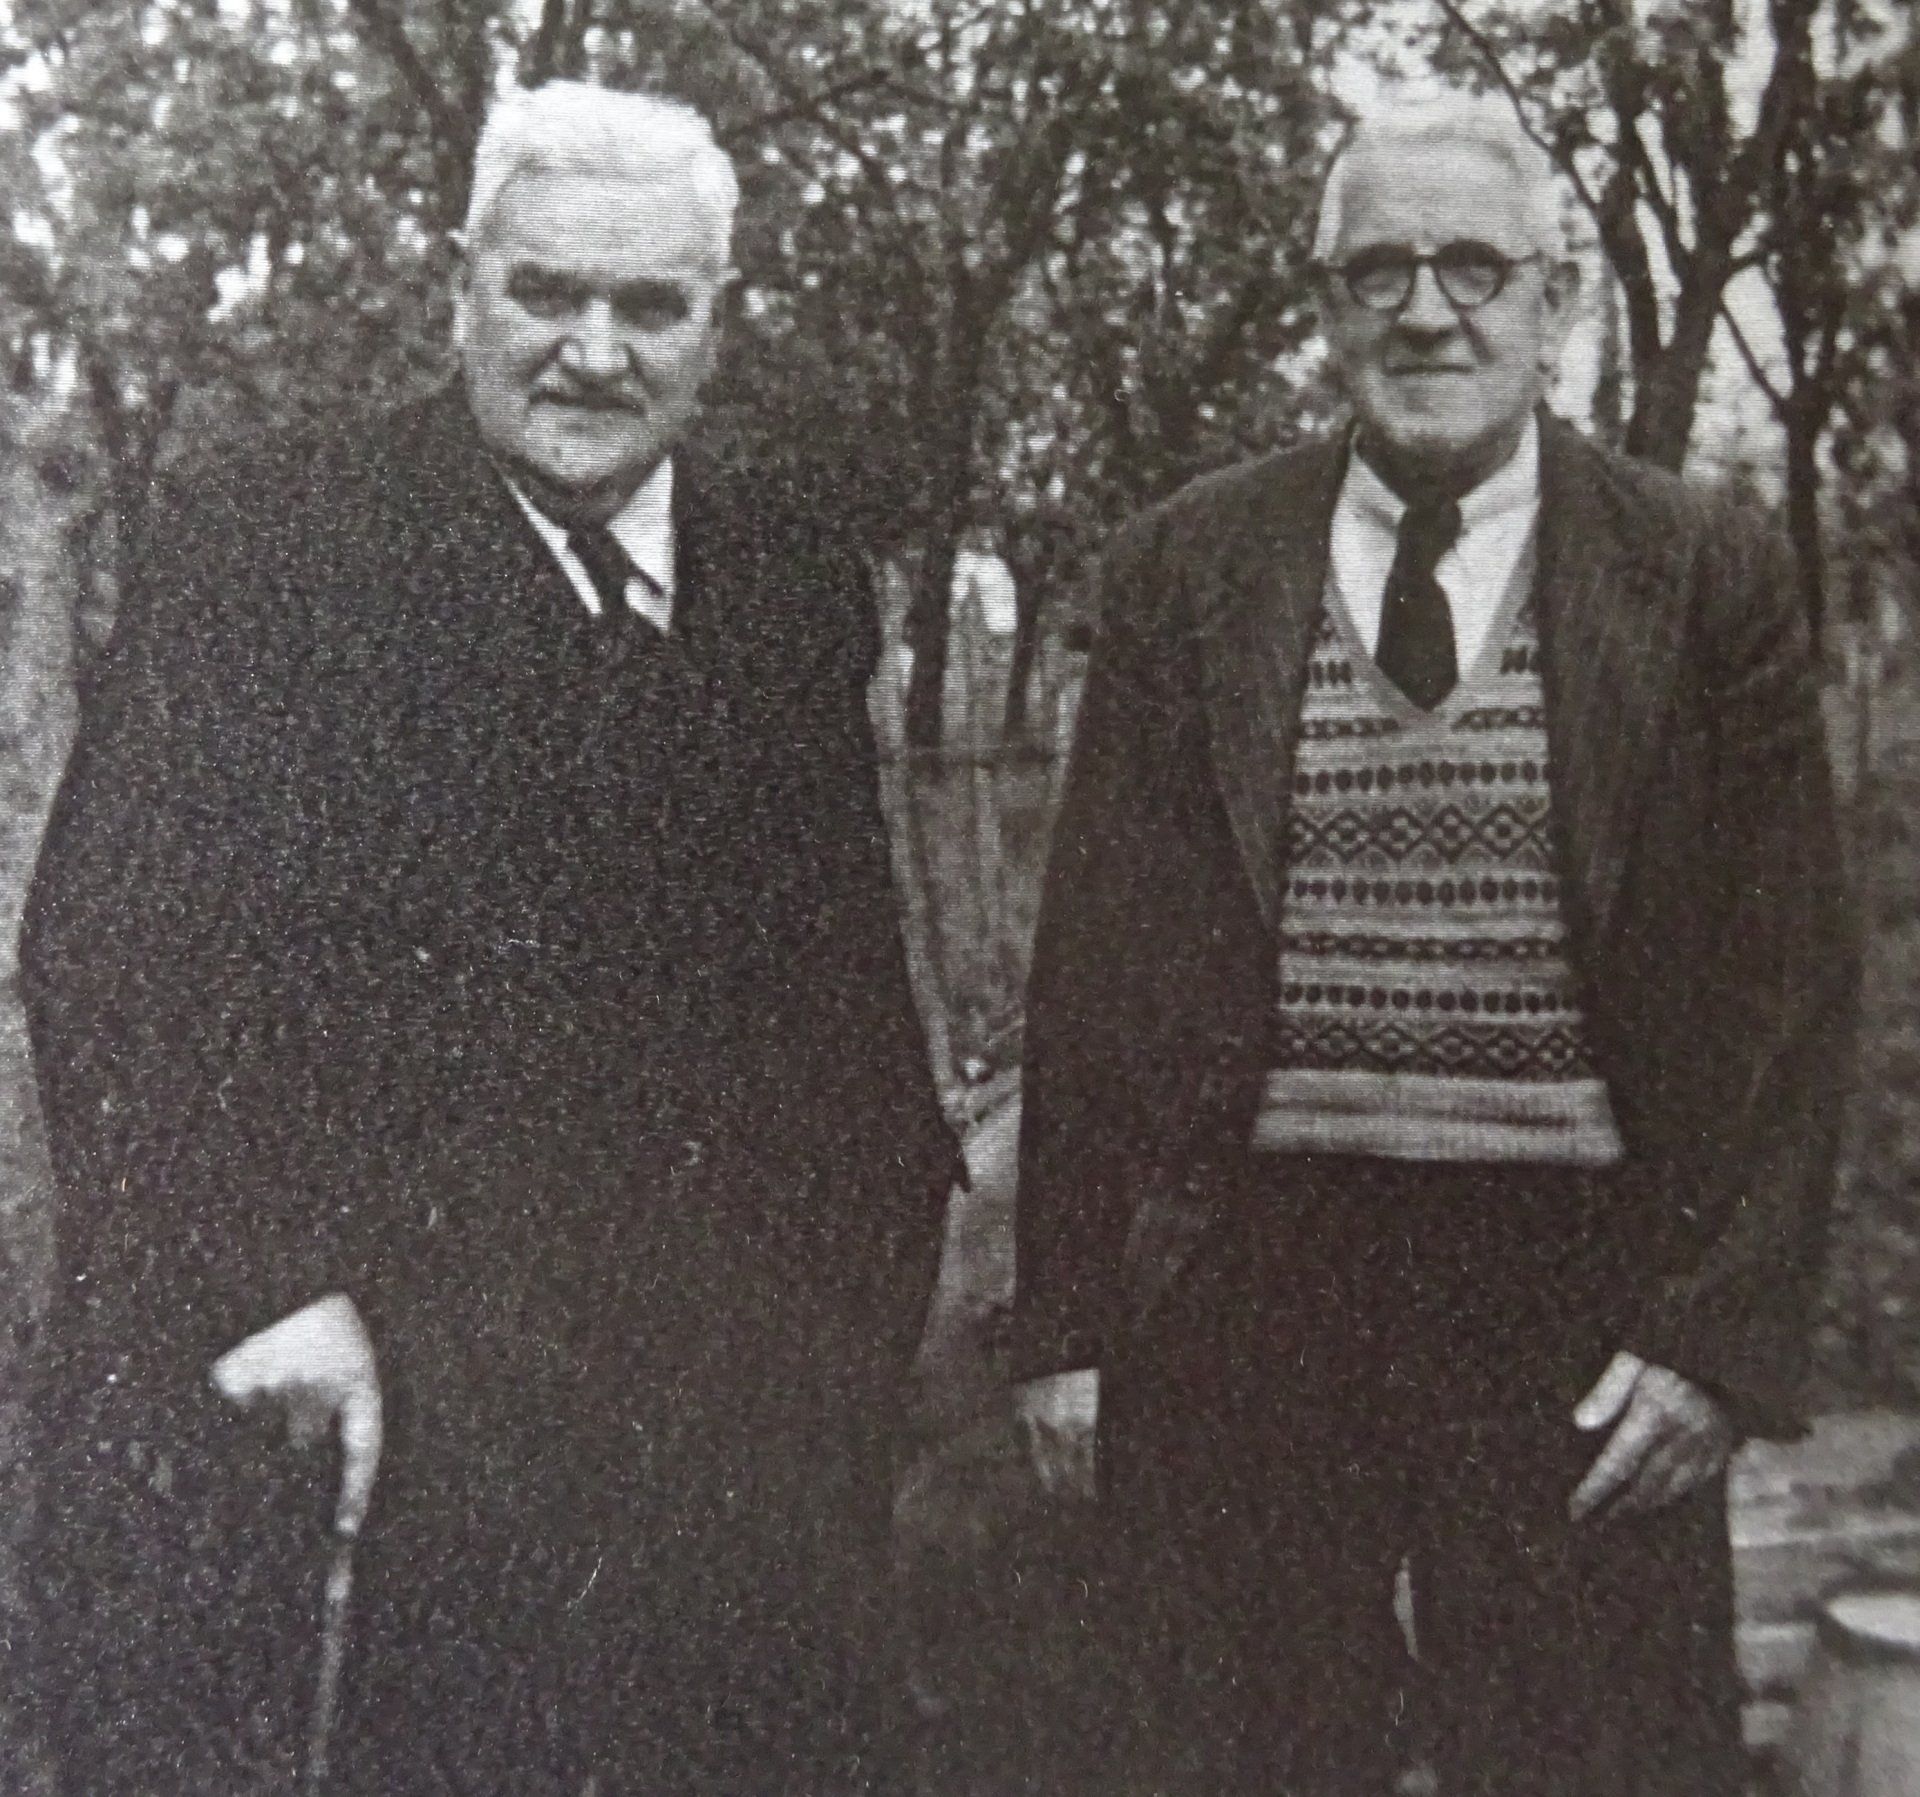 Alfred and Walter Light 1952